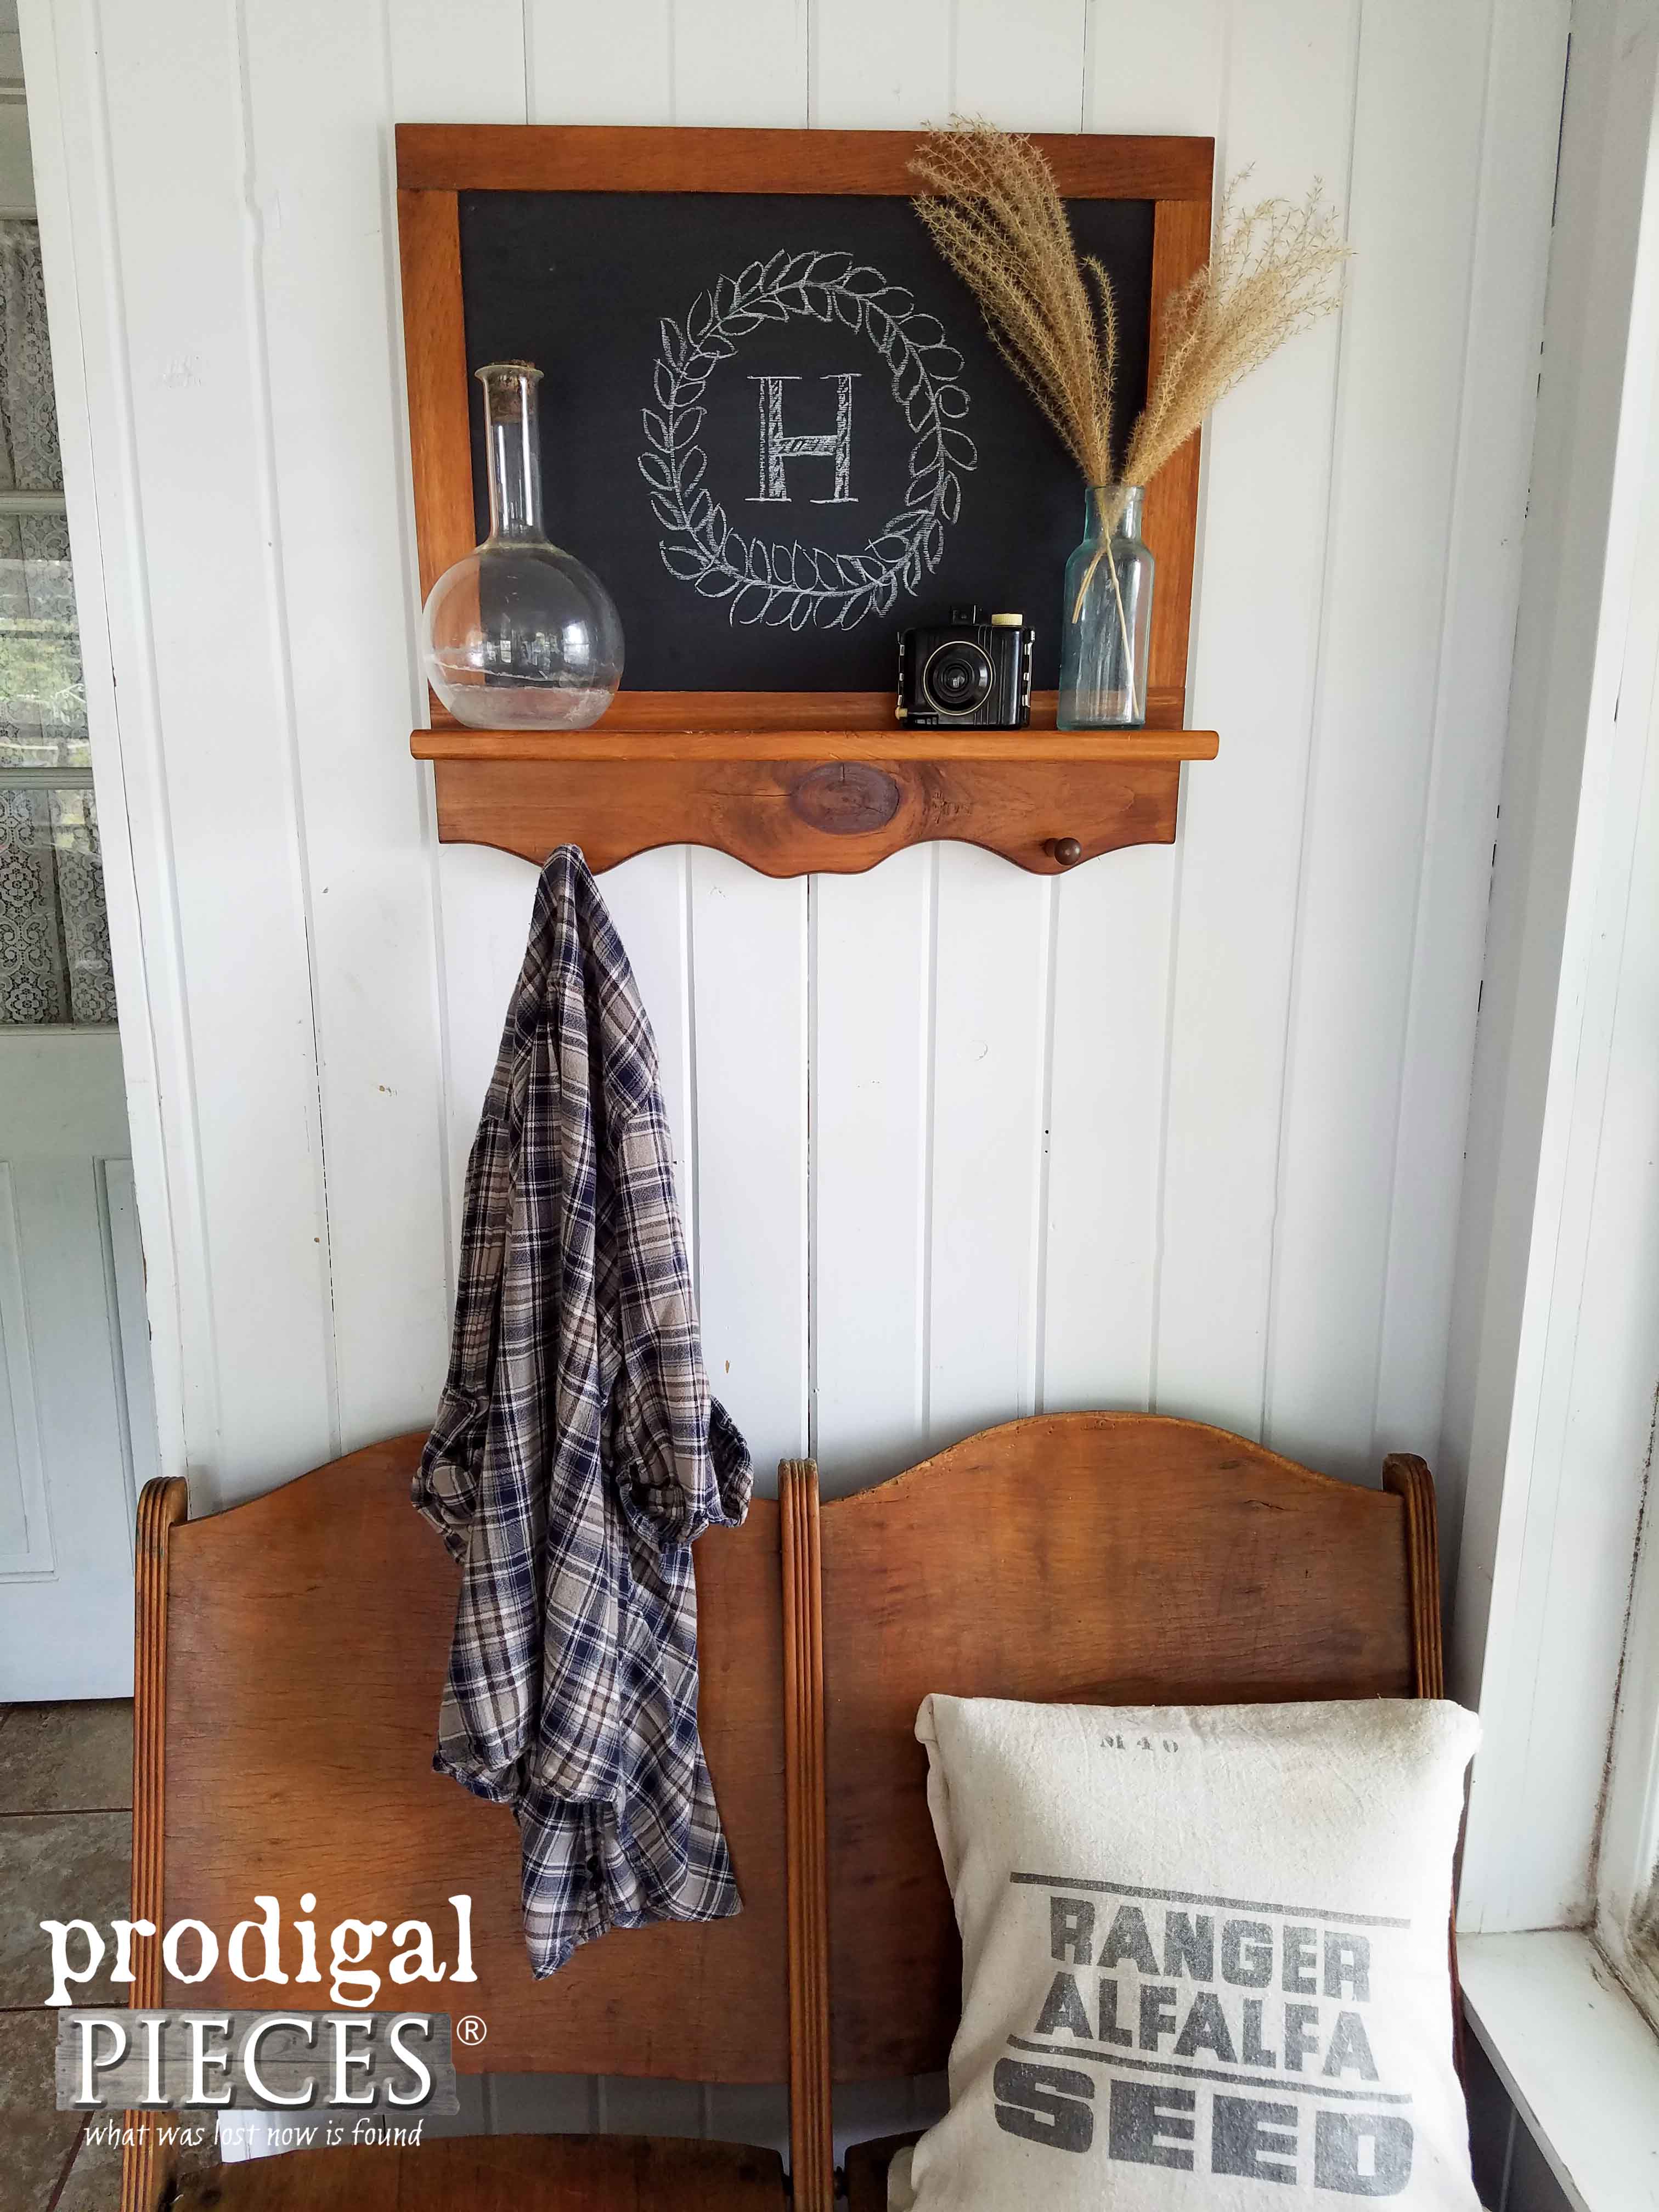 Rustic Farmhouse Chalkboard with Antique Theater Seats by Prodigal Pieces | www.prodigalpieces.com